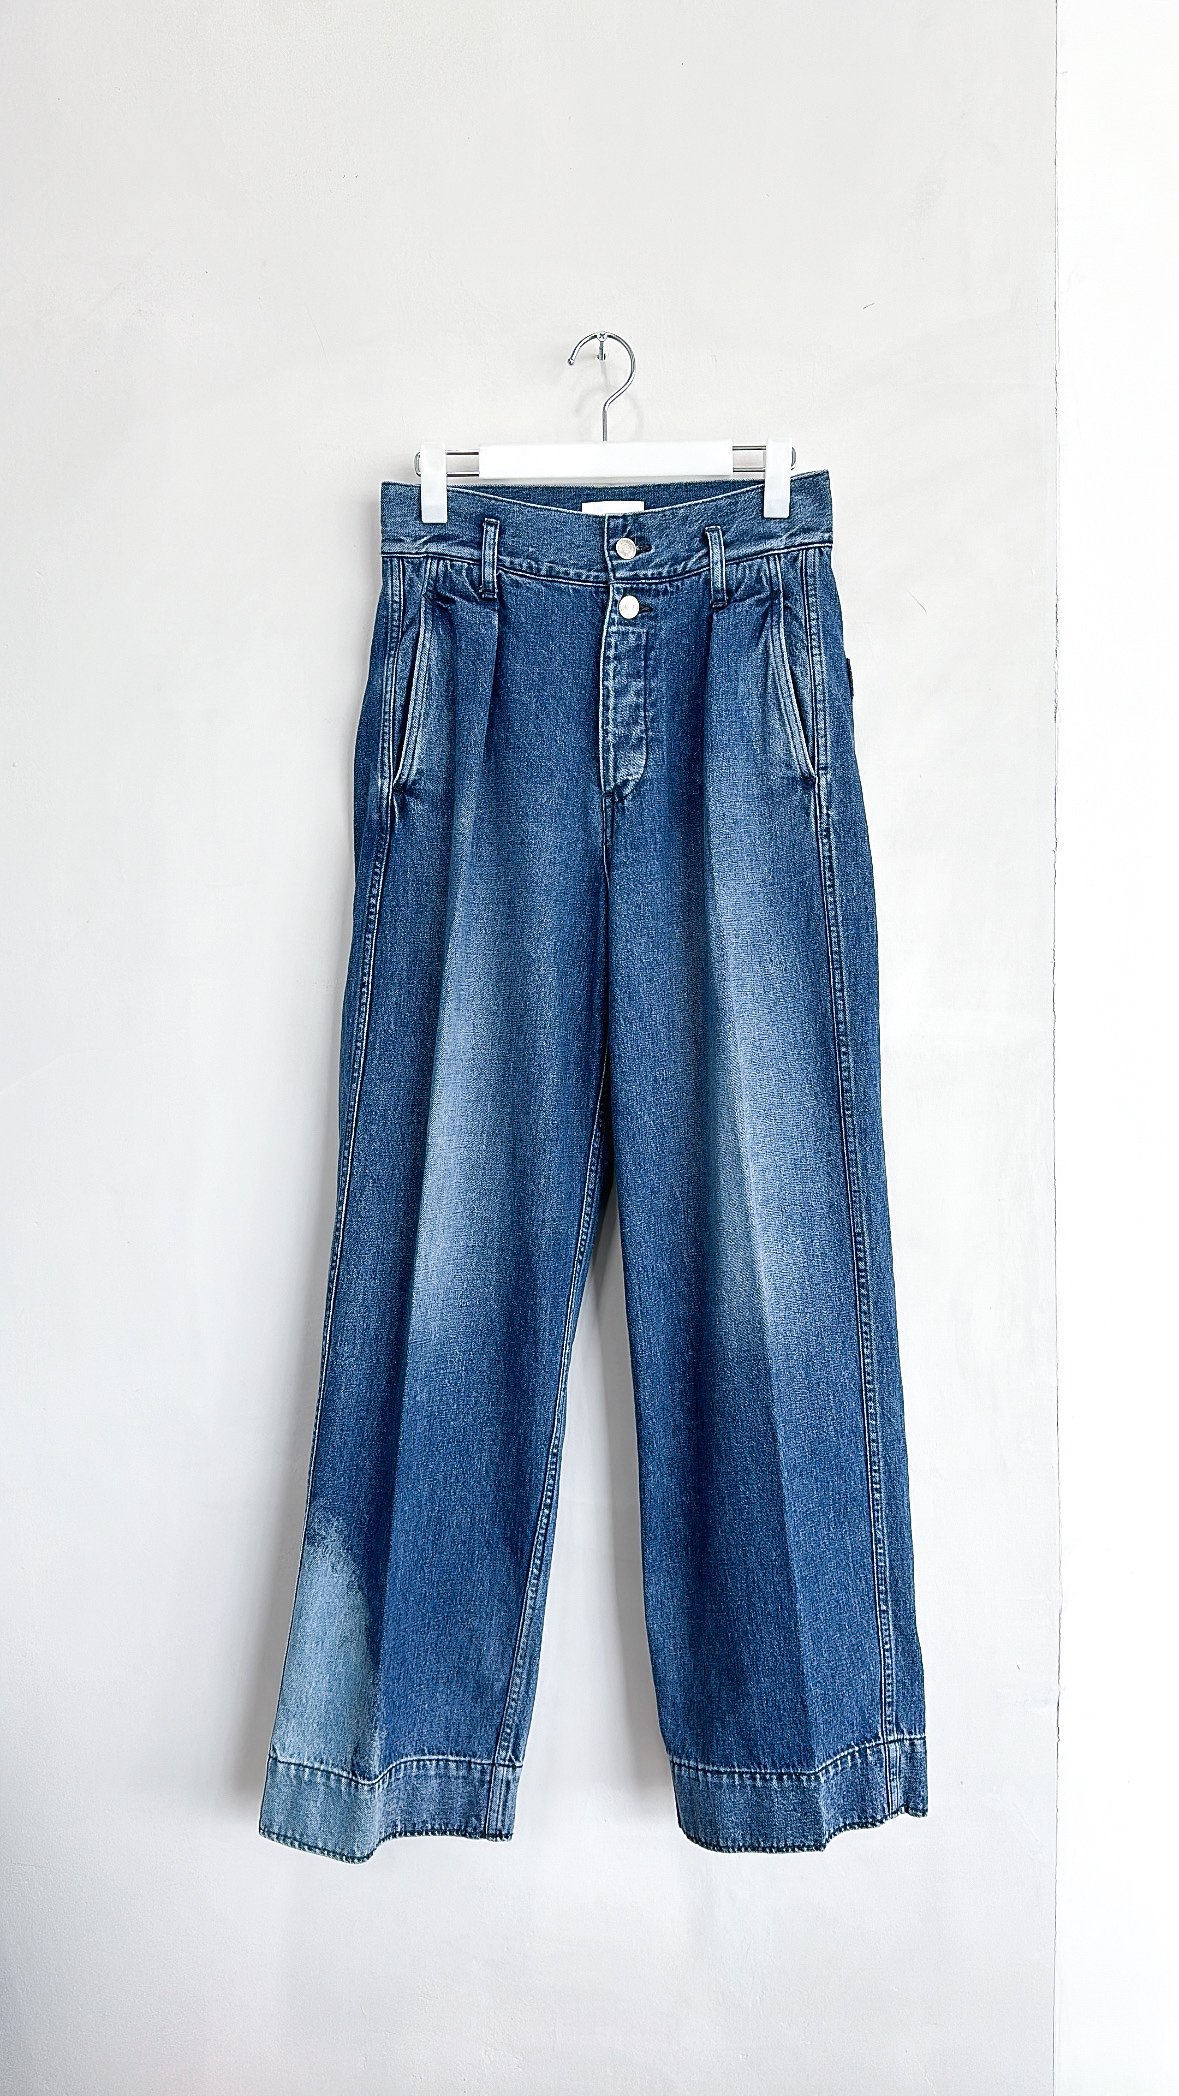 <img class='new_mark_img1' src='https://img.shop-pro.jp/img/new/icons47.gif' style='border:none;display:inline;margin:0px;padding:0px;width:auto;' />THE WIDE JEAN TROUSERS